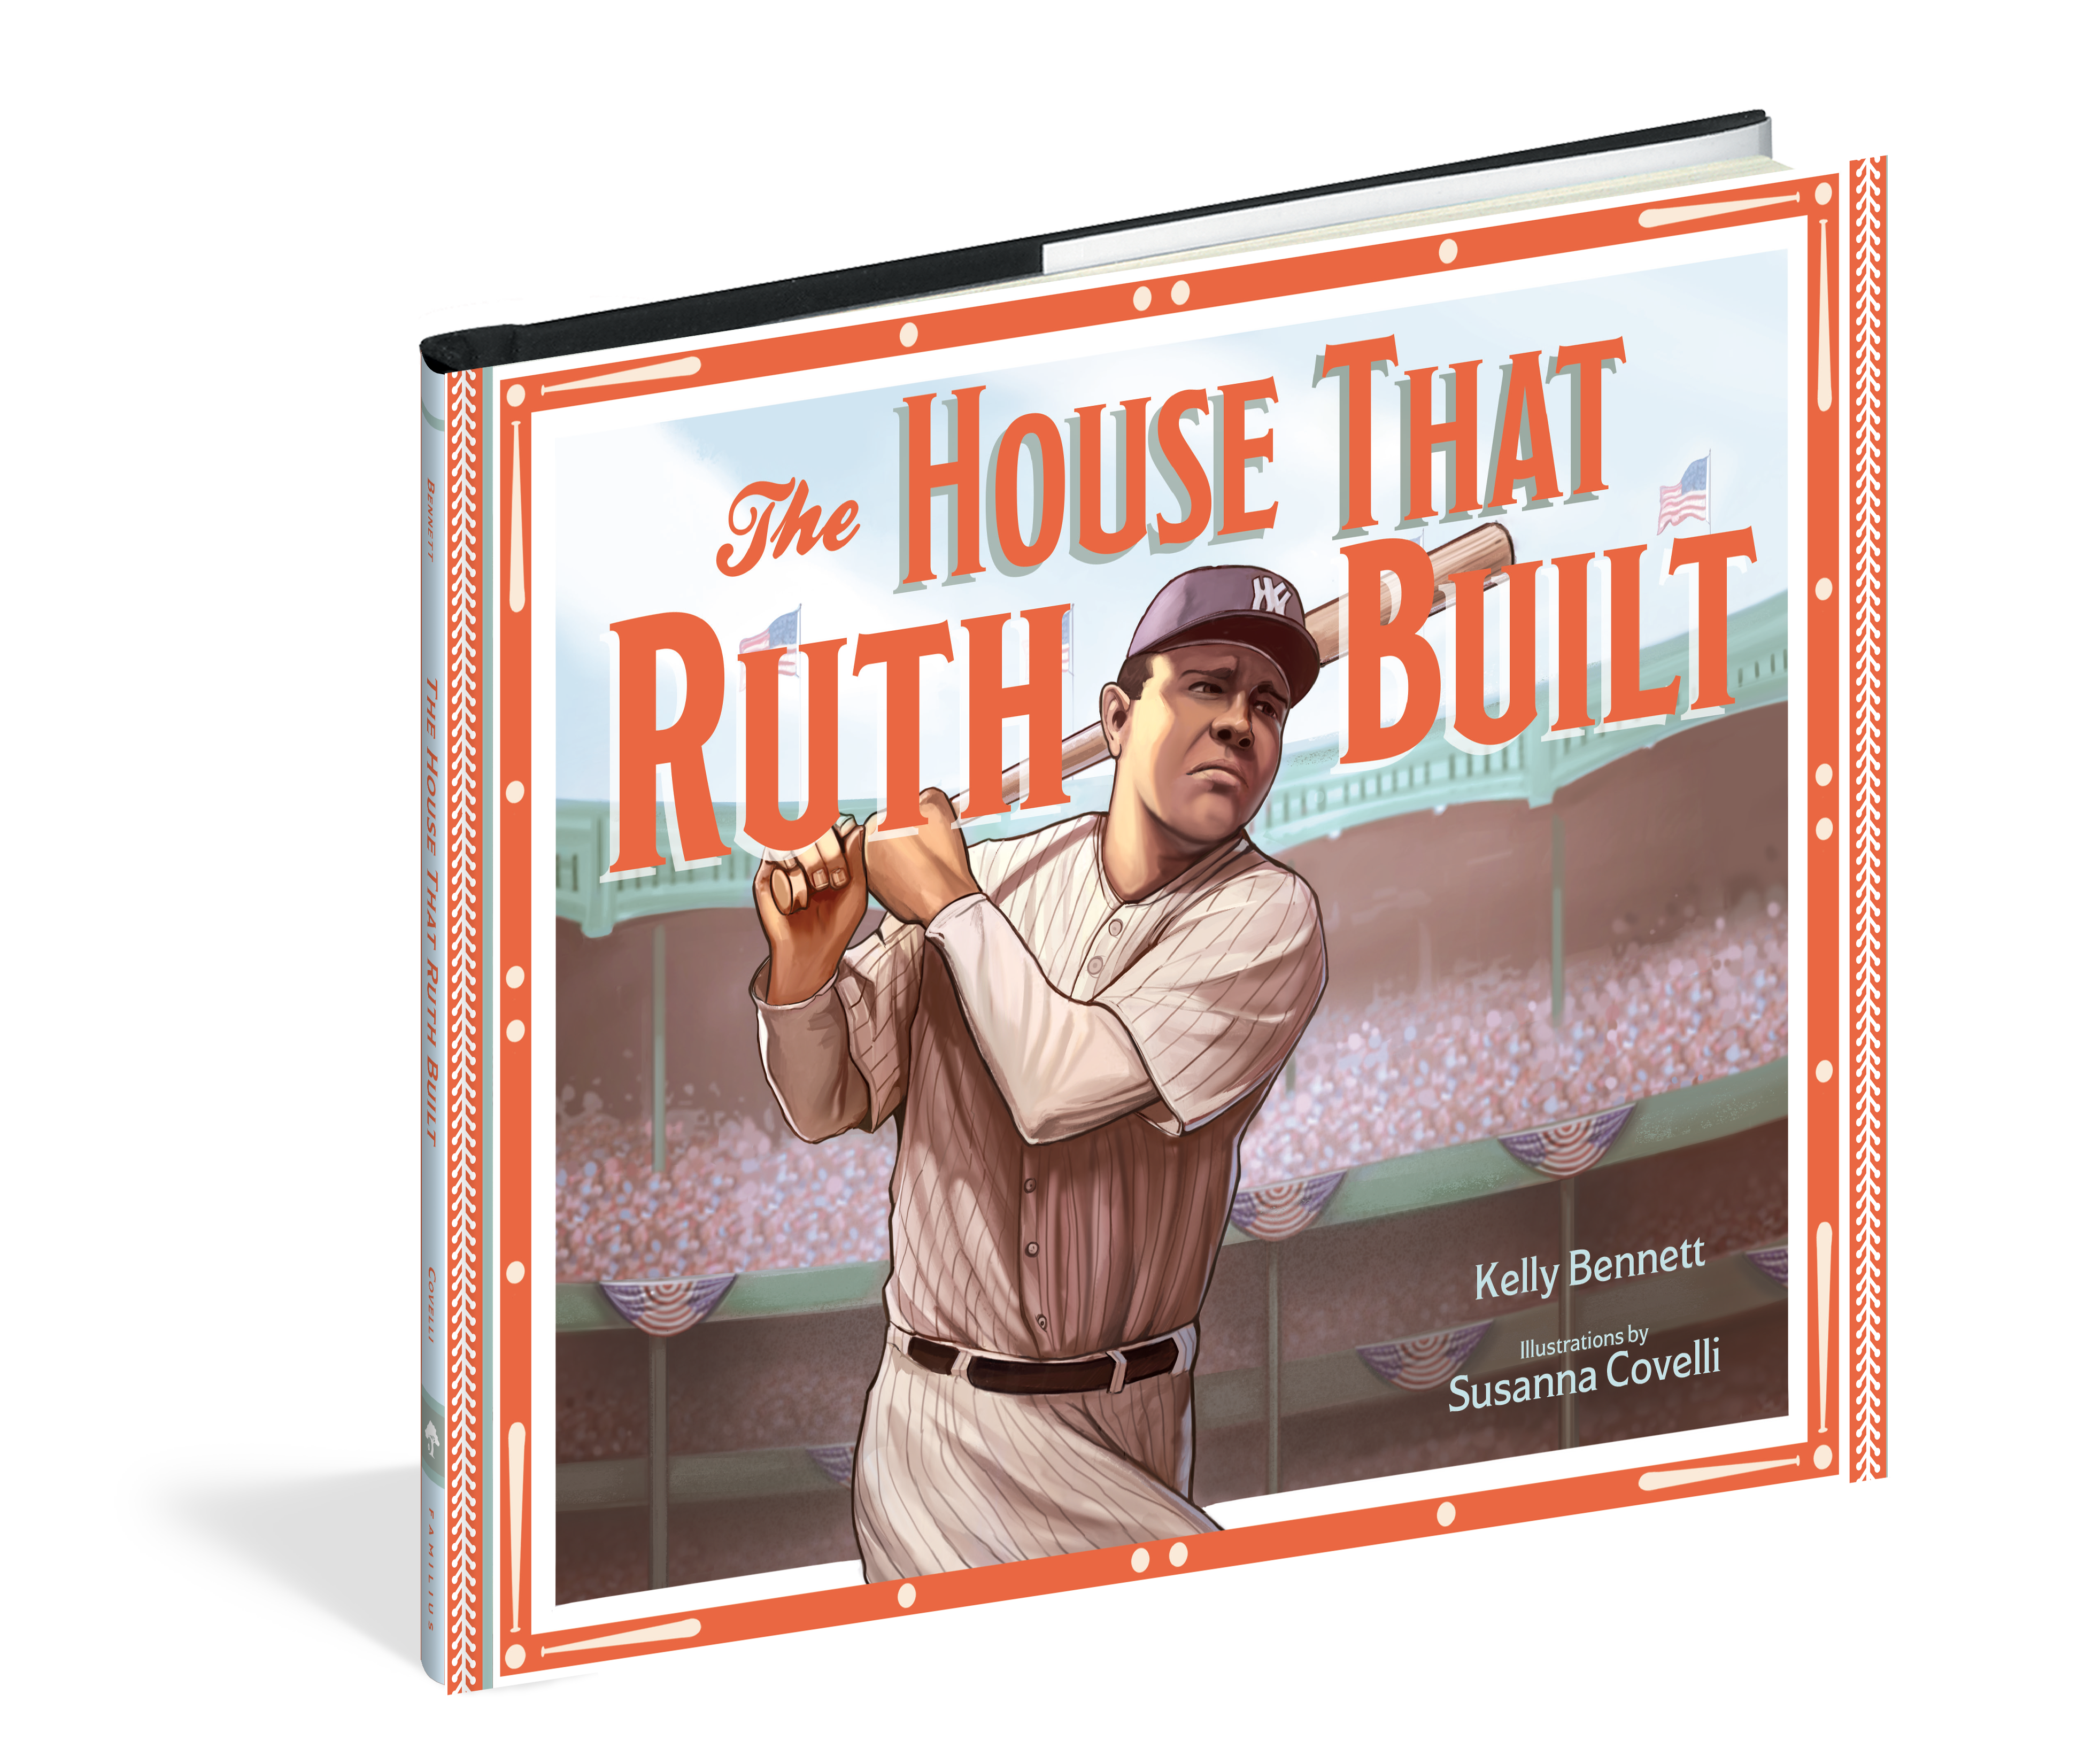 The cover of the picture book The House That Ruth Built.